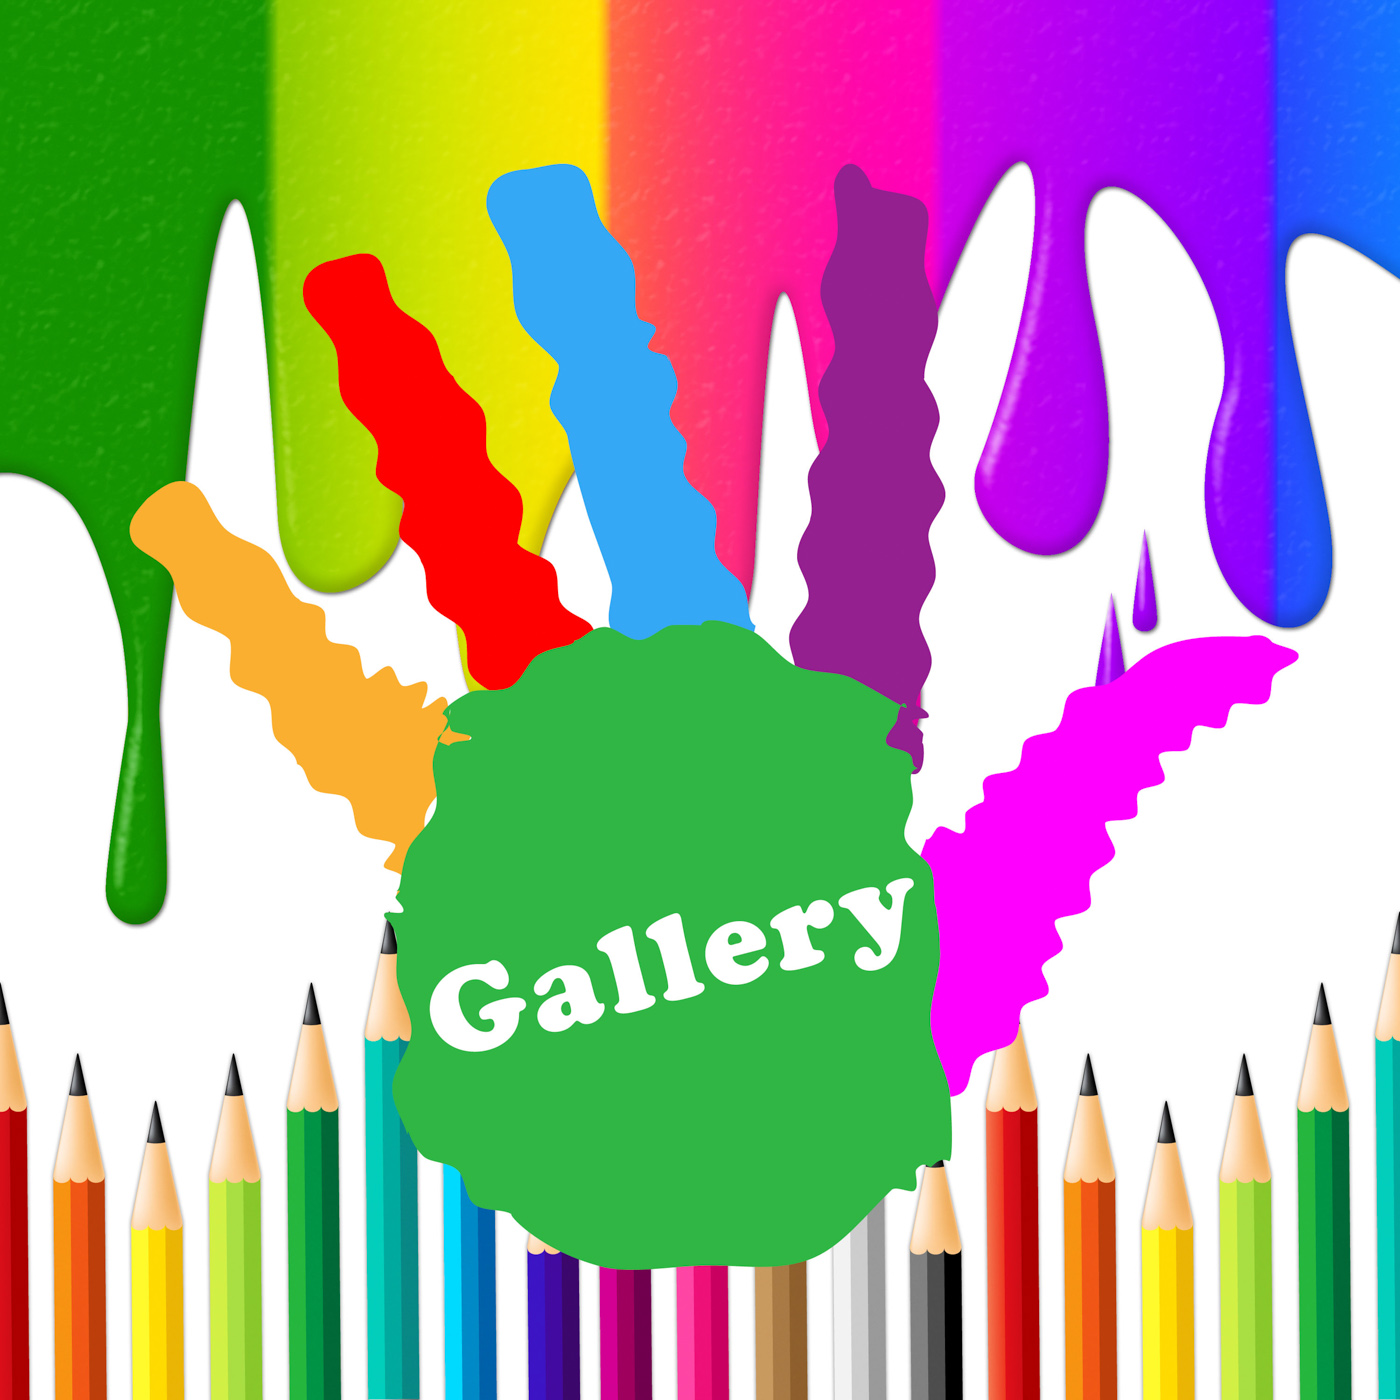 Kids gallery shows paint colors and artwork photo